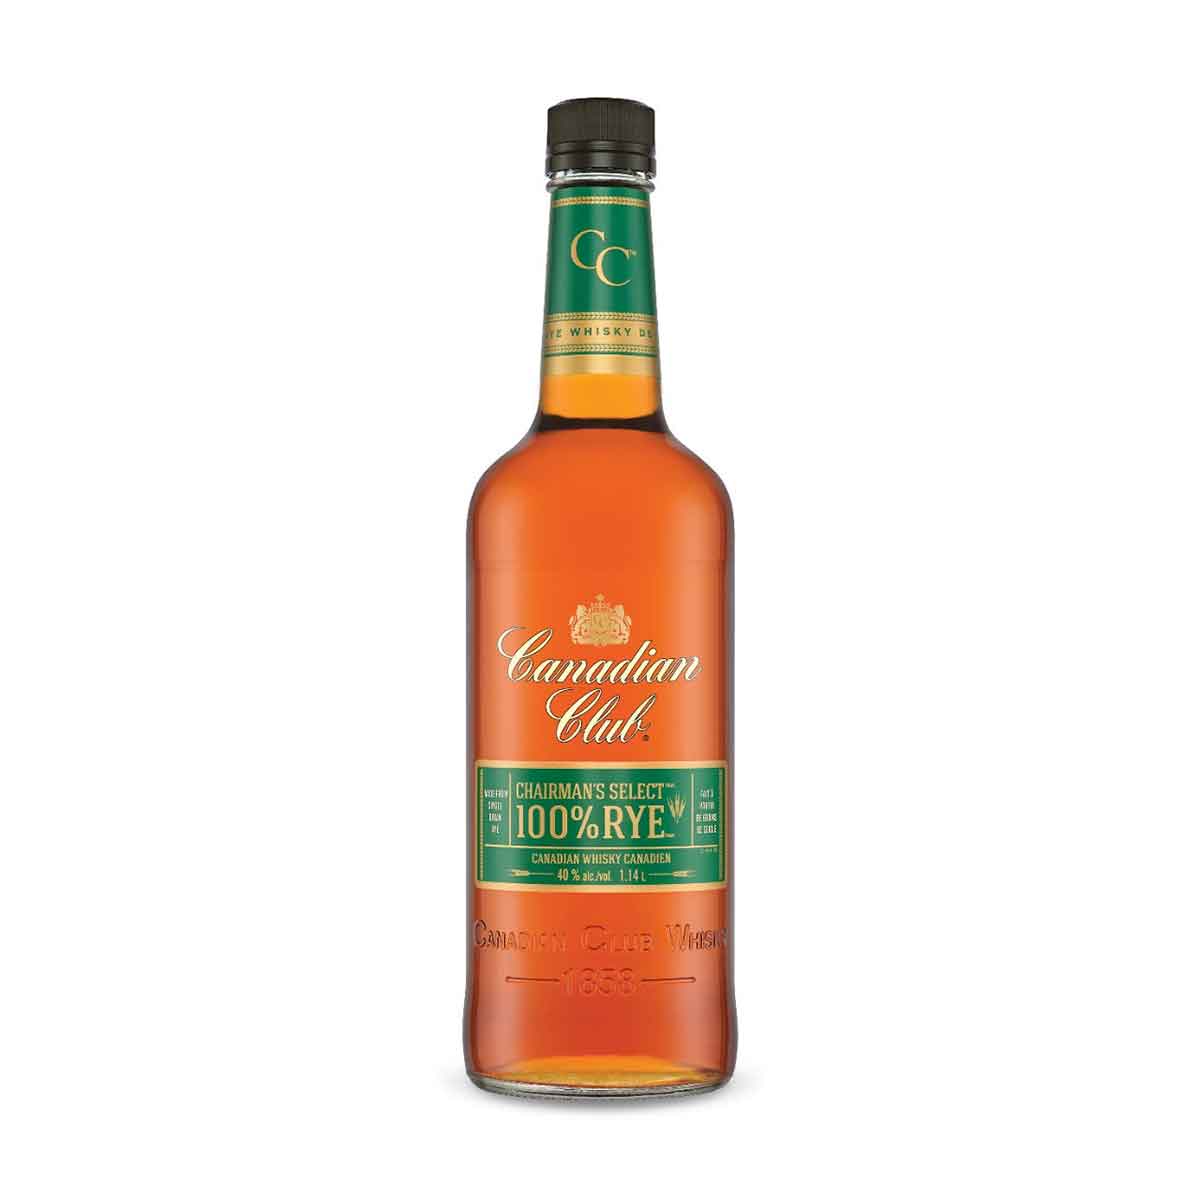 TAG Liquor Stores BC-Canadian Club 100% Rye Whisky 1.14L